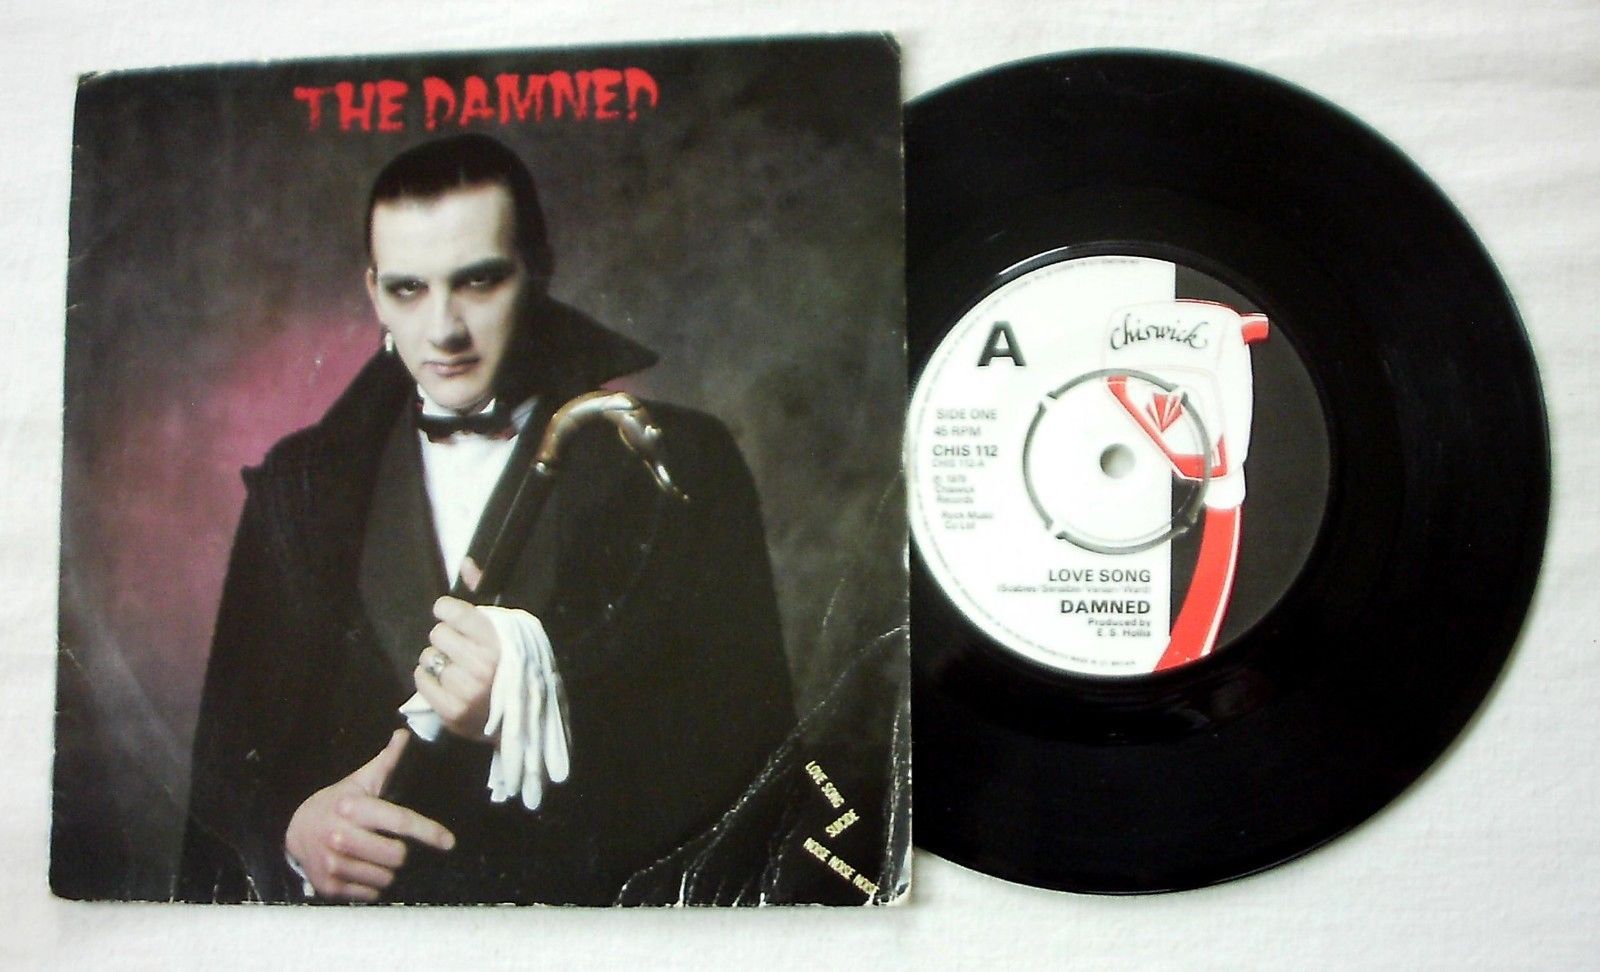 popsike.com - THE DAMNED - LOVE SONG - DAVE VANIAN SLEEVE - A1/B1 - 7"  VINYL - auction details